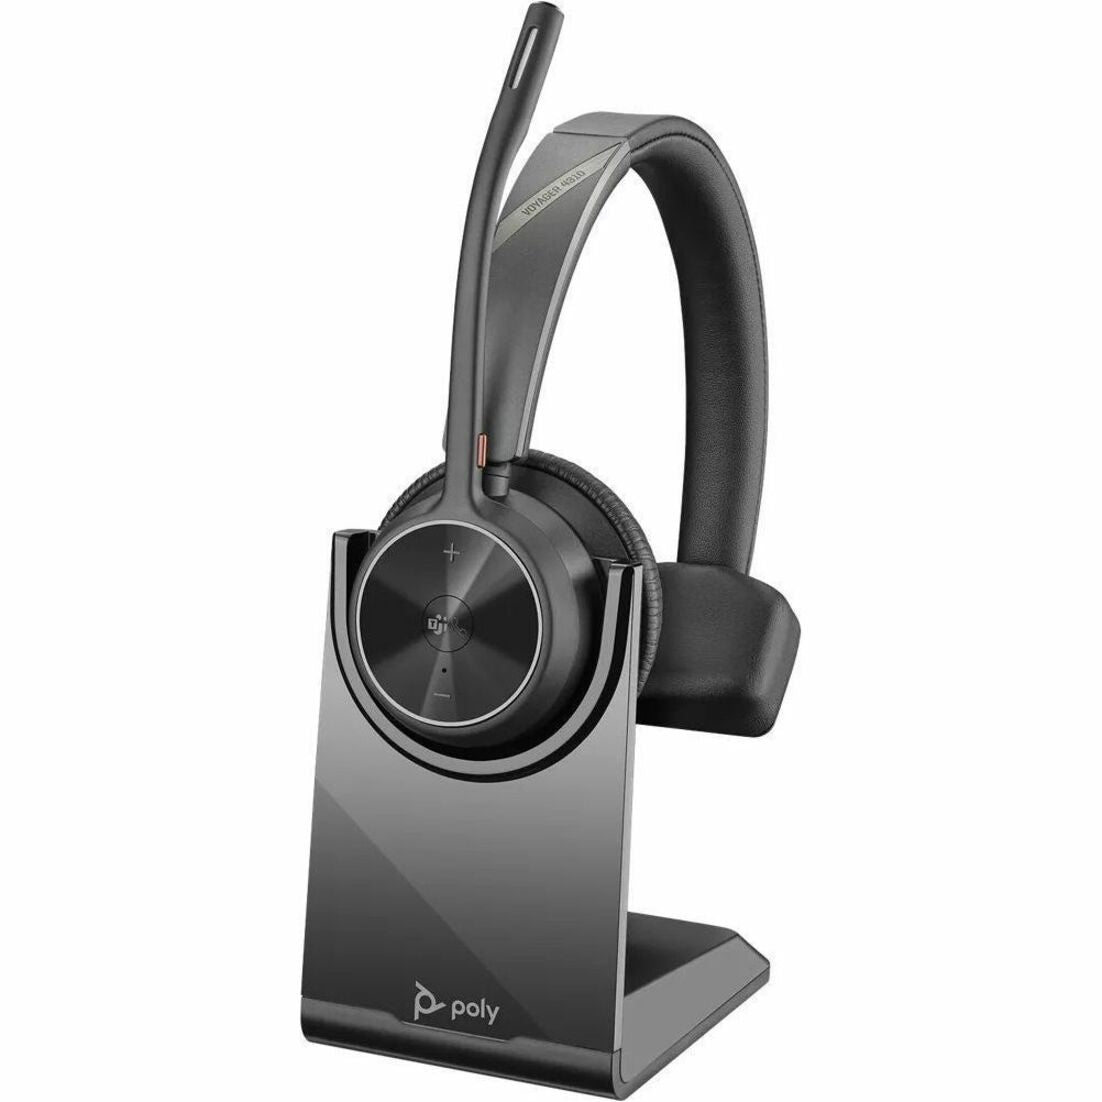 Poly 218478-01 Voyager 4300 UC 4320 C Headset, Wireless Bluetooth Stereo Headset with Noise Cancelling Microphone